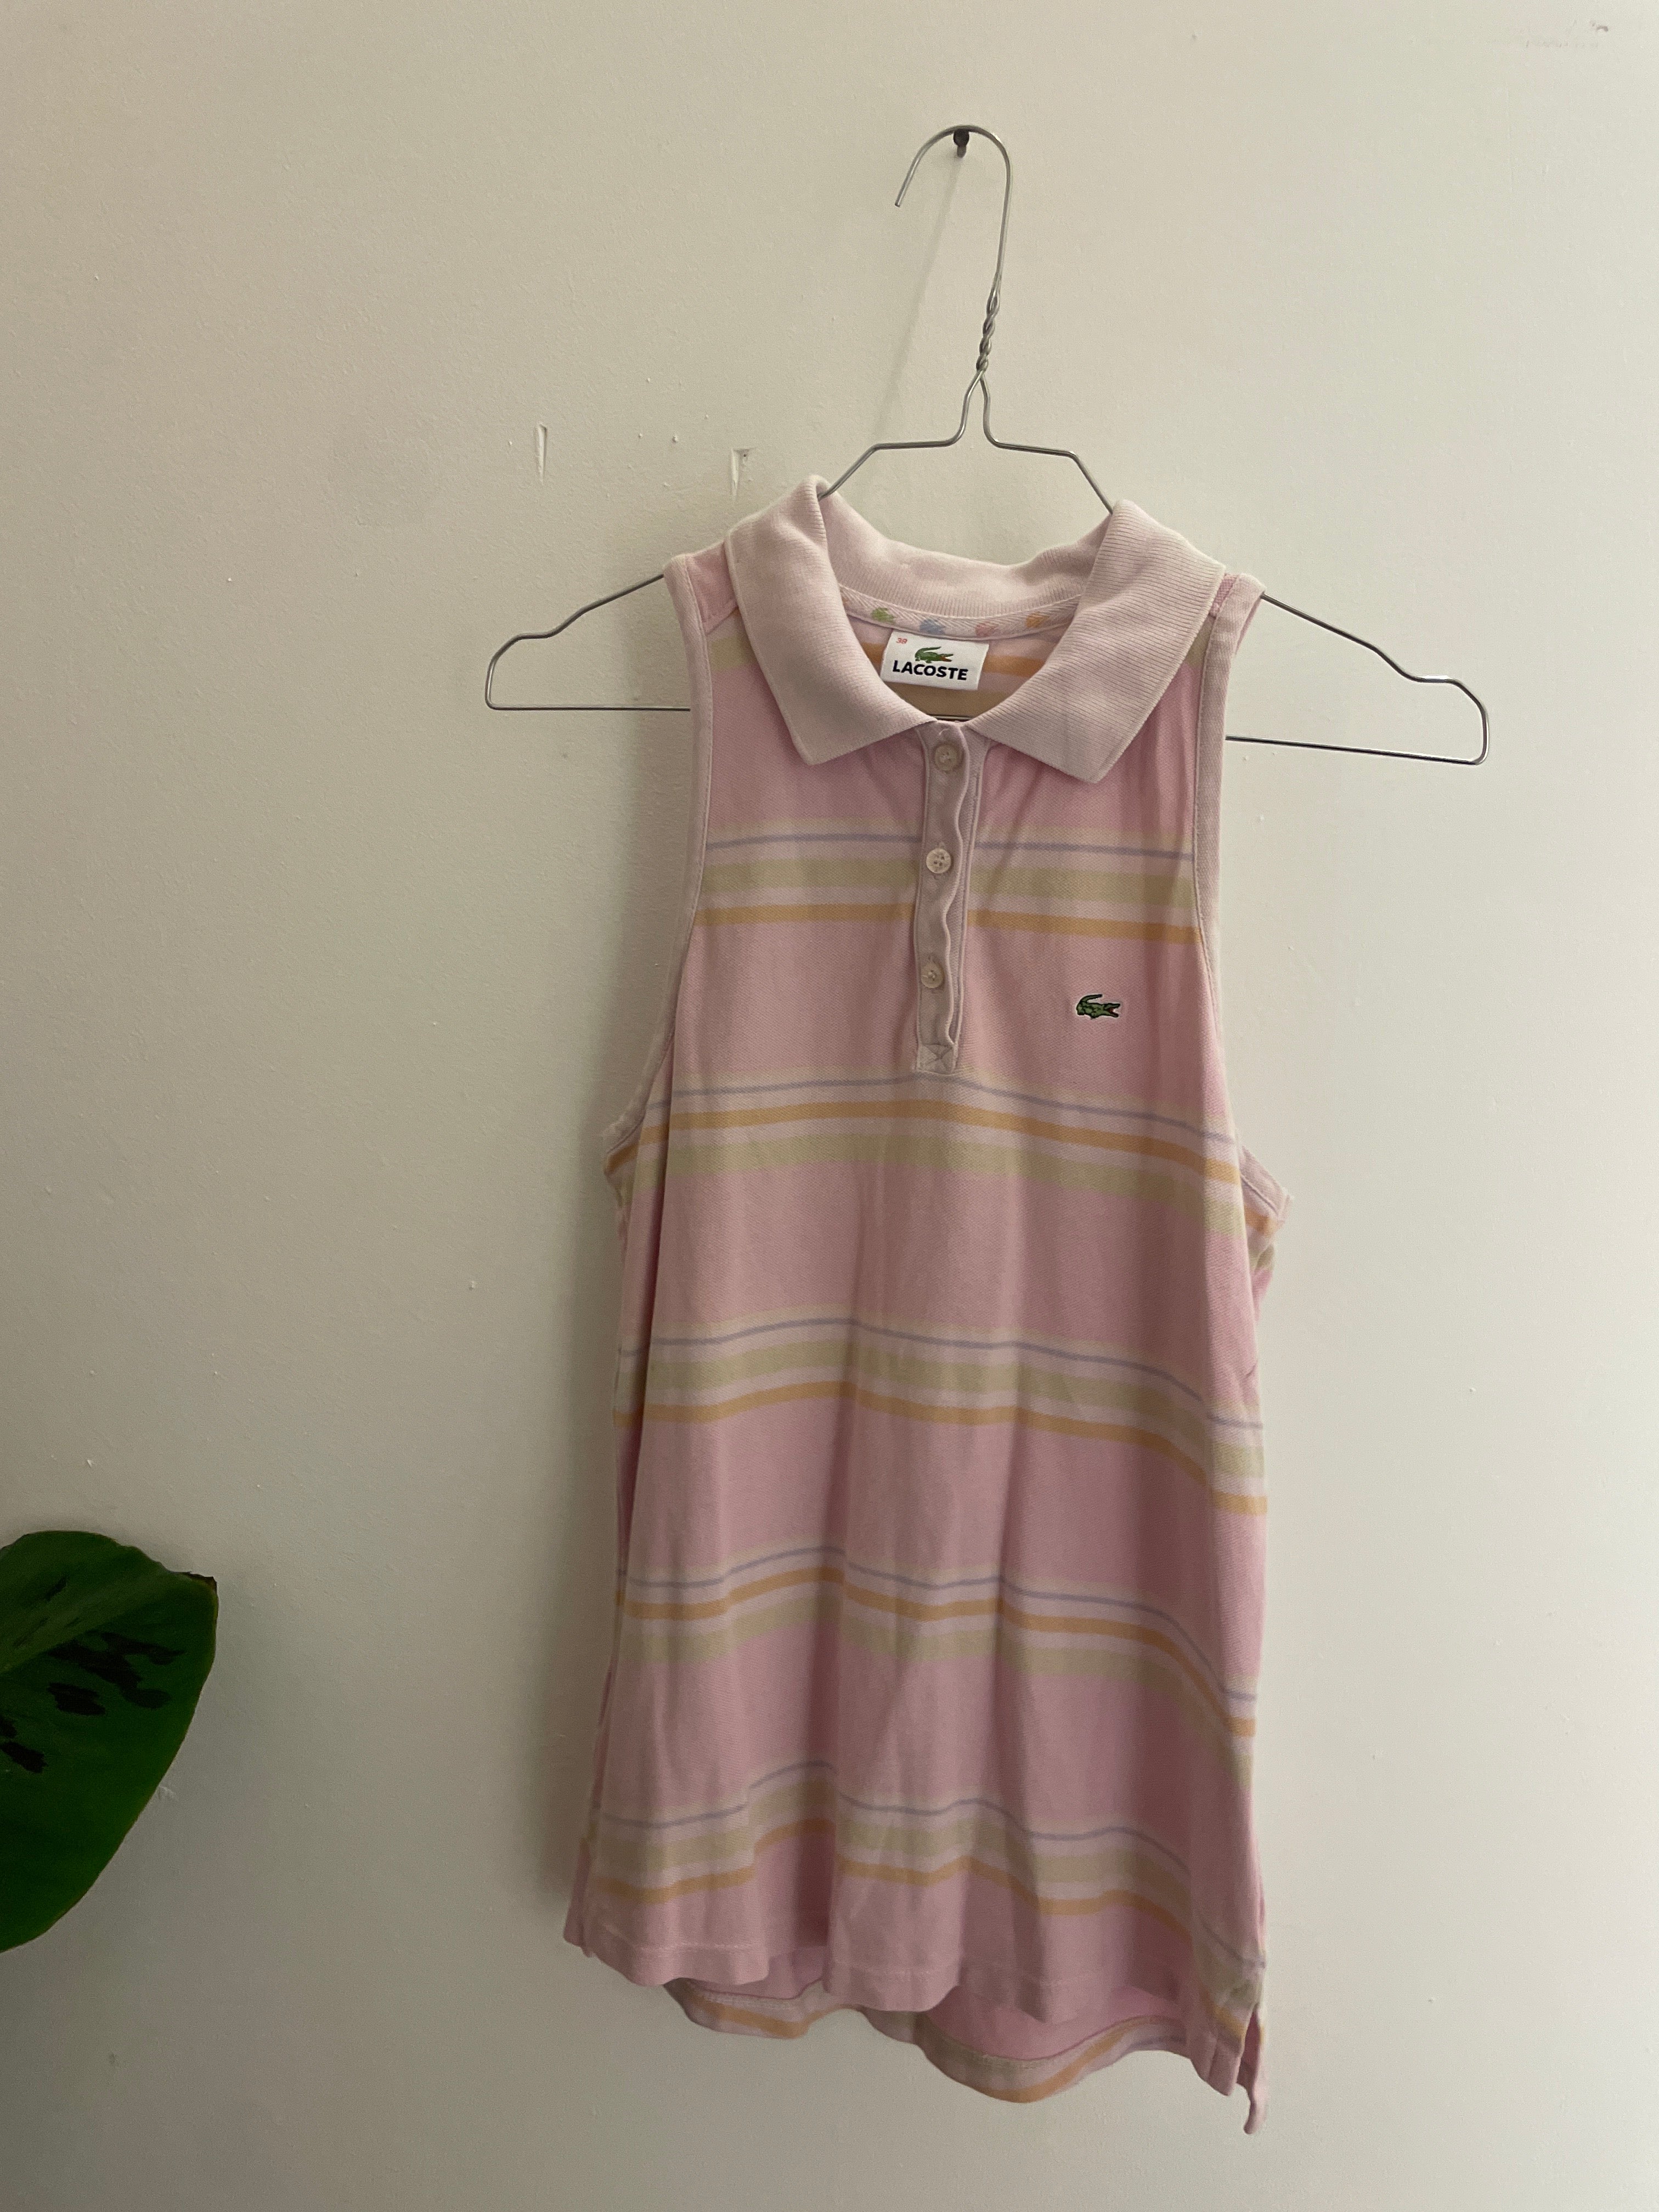 Vintage lacoste pink polo shirt for girls size S